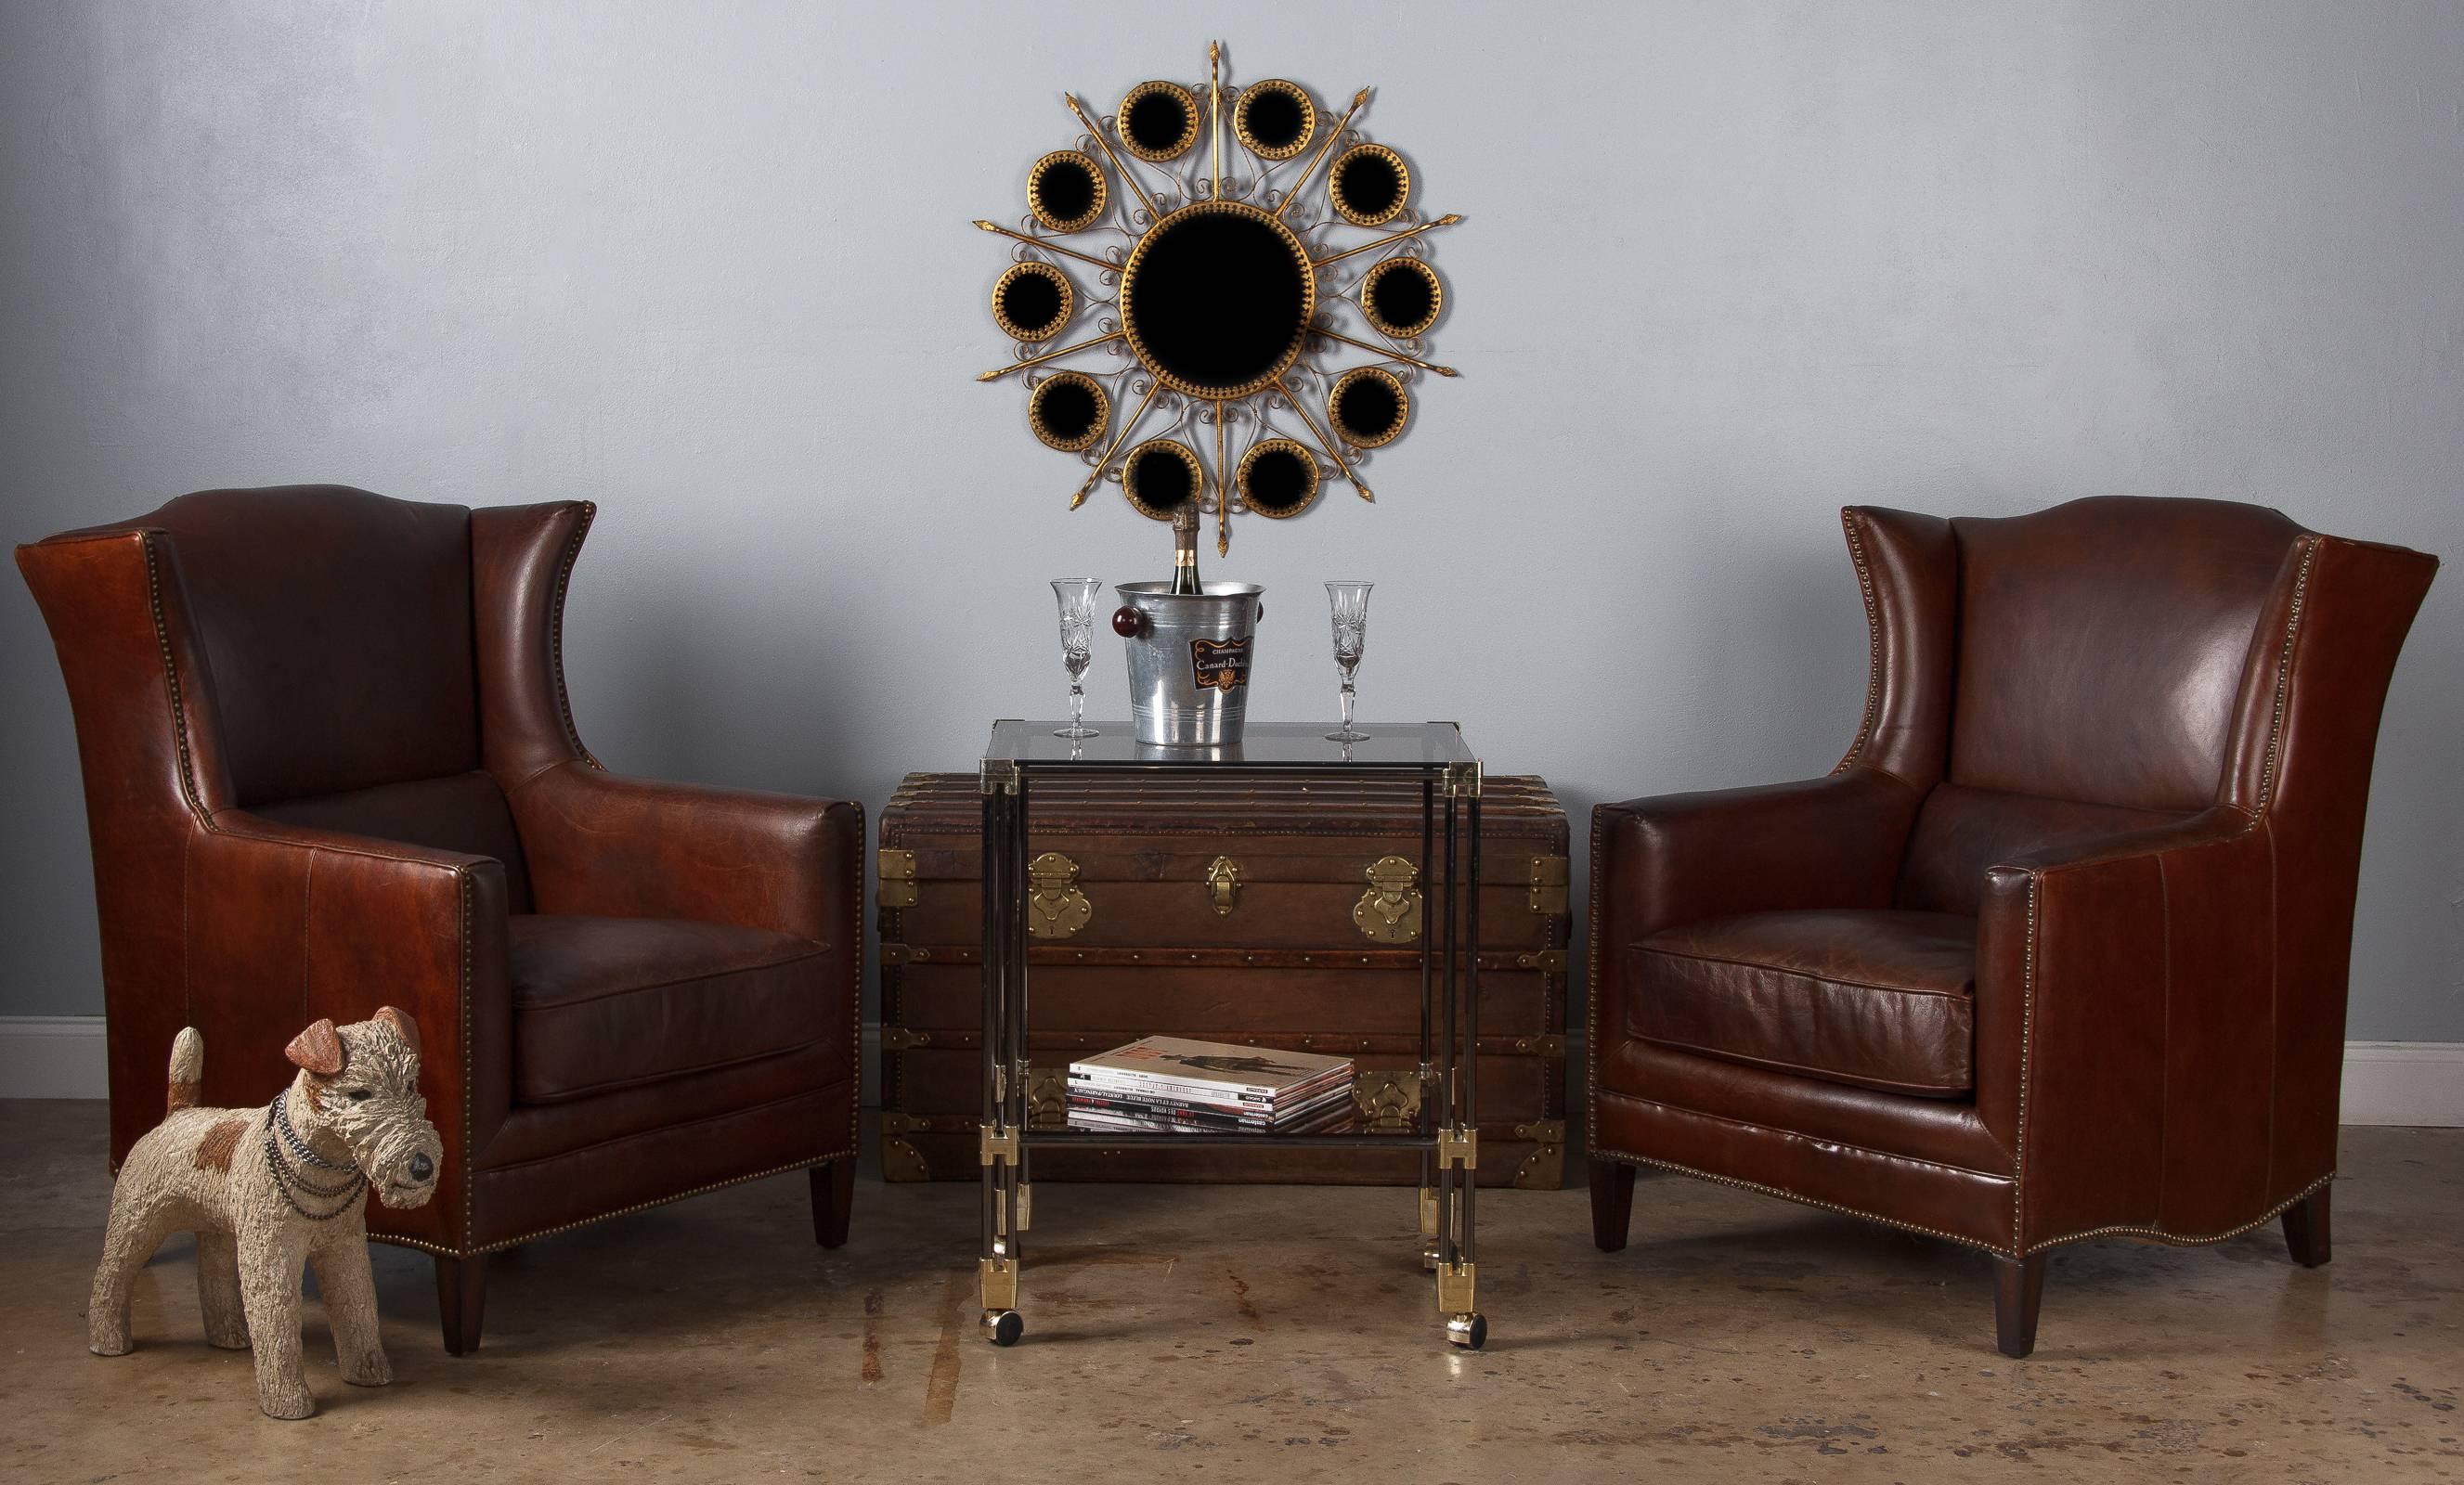 A pair of French wingback armchairs in rich brown leather, circa 1980. These armchairs have wonderful silhouettes, with a slight flare to the wingbacks, scalloped tops and curved edges along the lower sides. The leather is a deep, chocolate brown